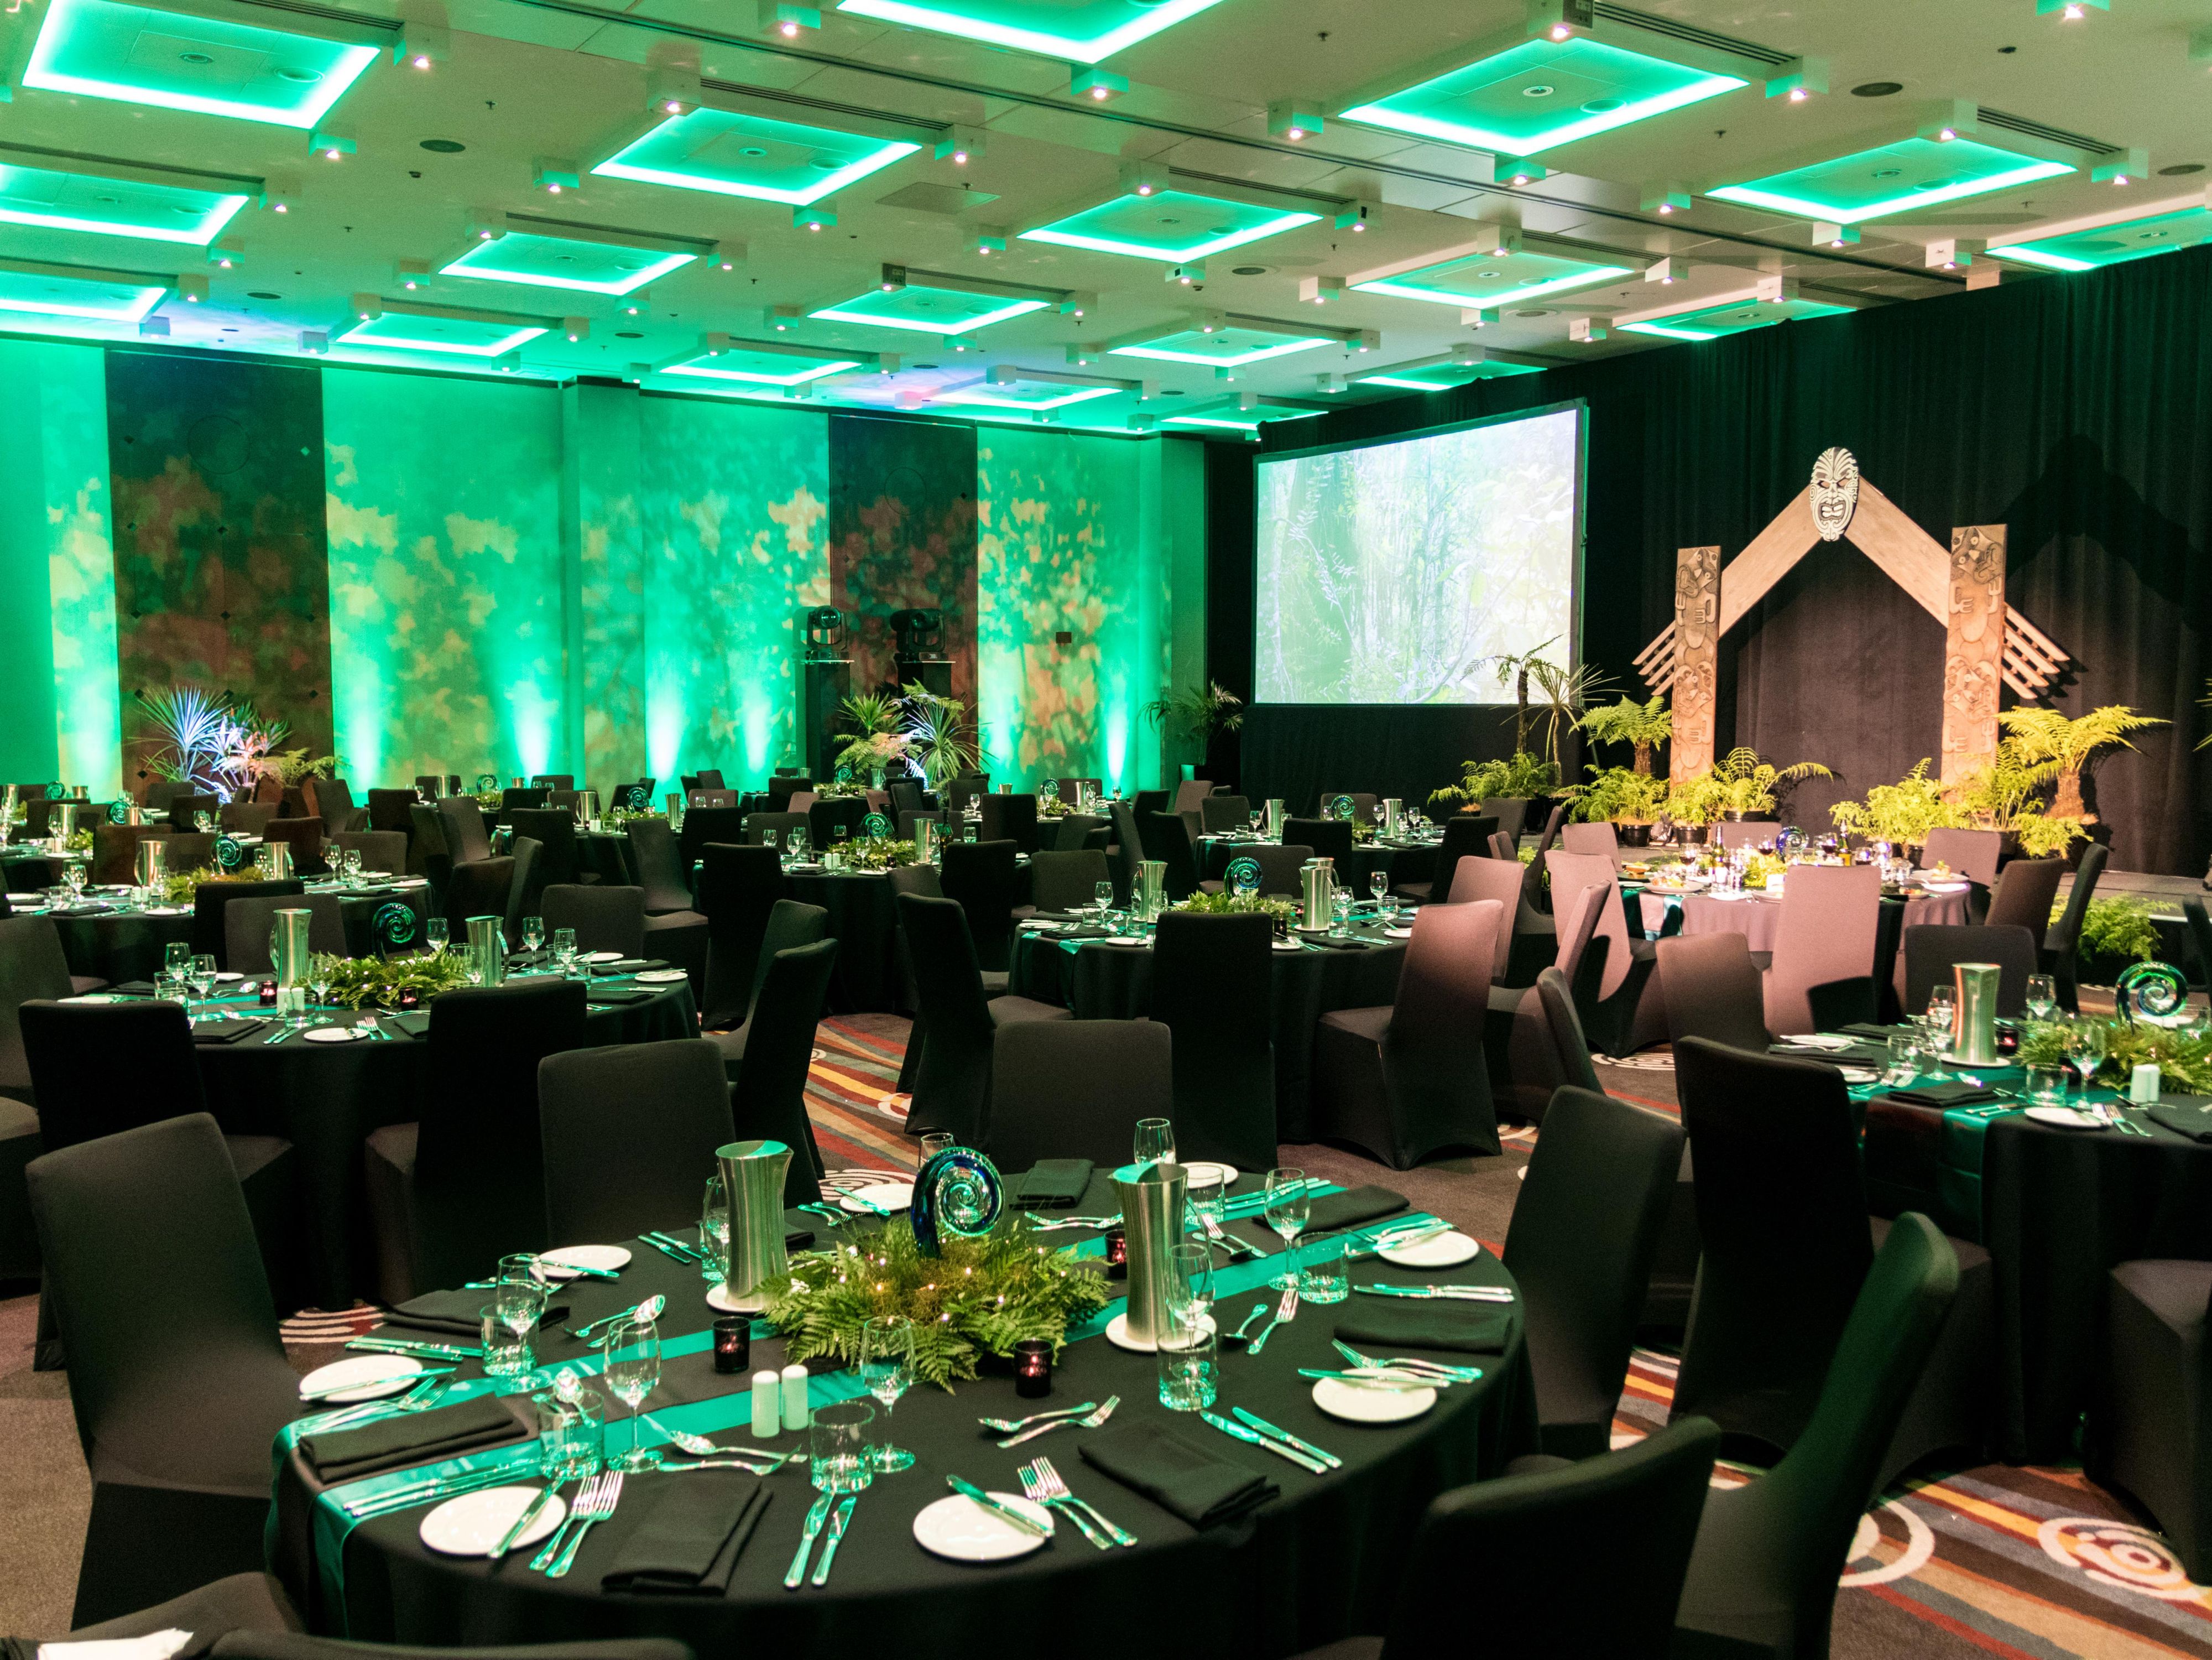 Been searching for a central Auckland event space that ticks your boxes? At Crowne Plaza Auckland, we offer 10 flexible function rooms in the heart of the city, close to shopping, dining and entertainment. Our flexible spaces can be changed to suit your function. Inner City parking and in-house hotel accommodation meets your delegates’ needs. 